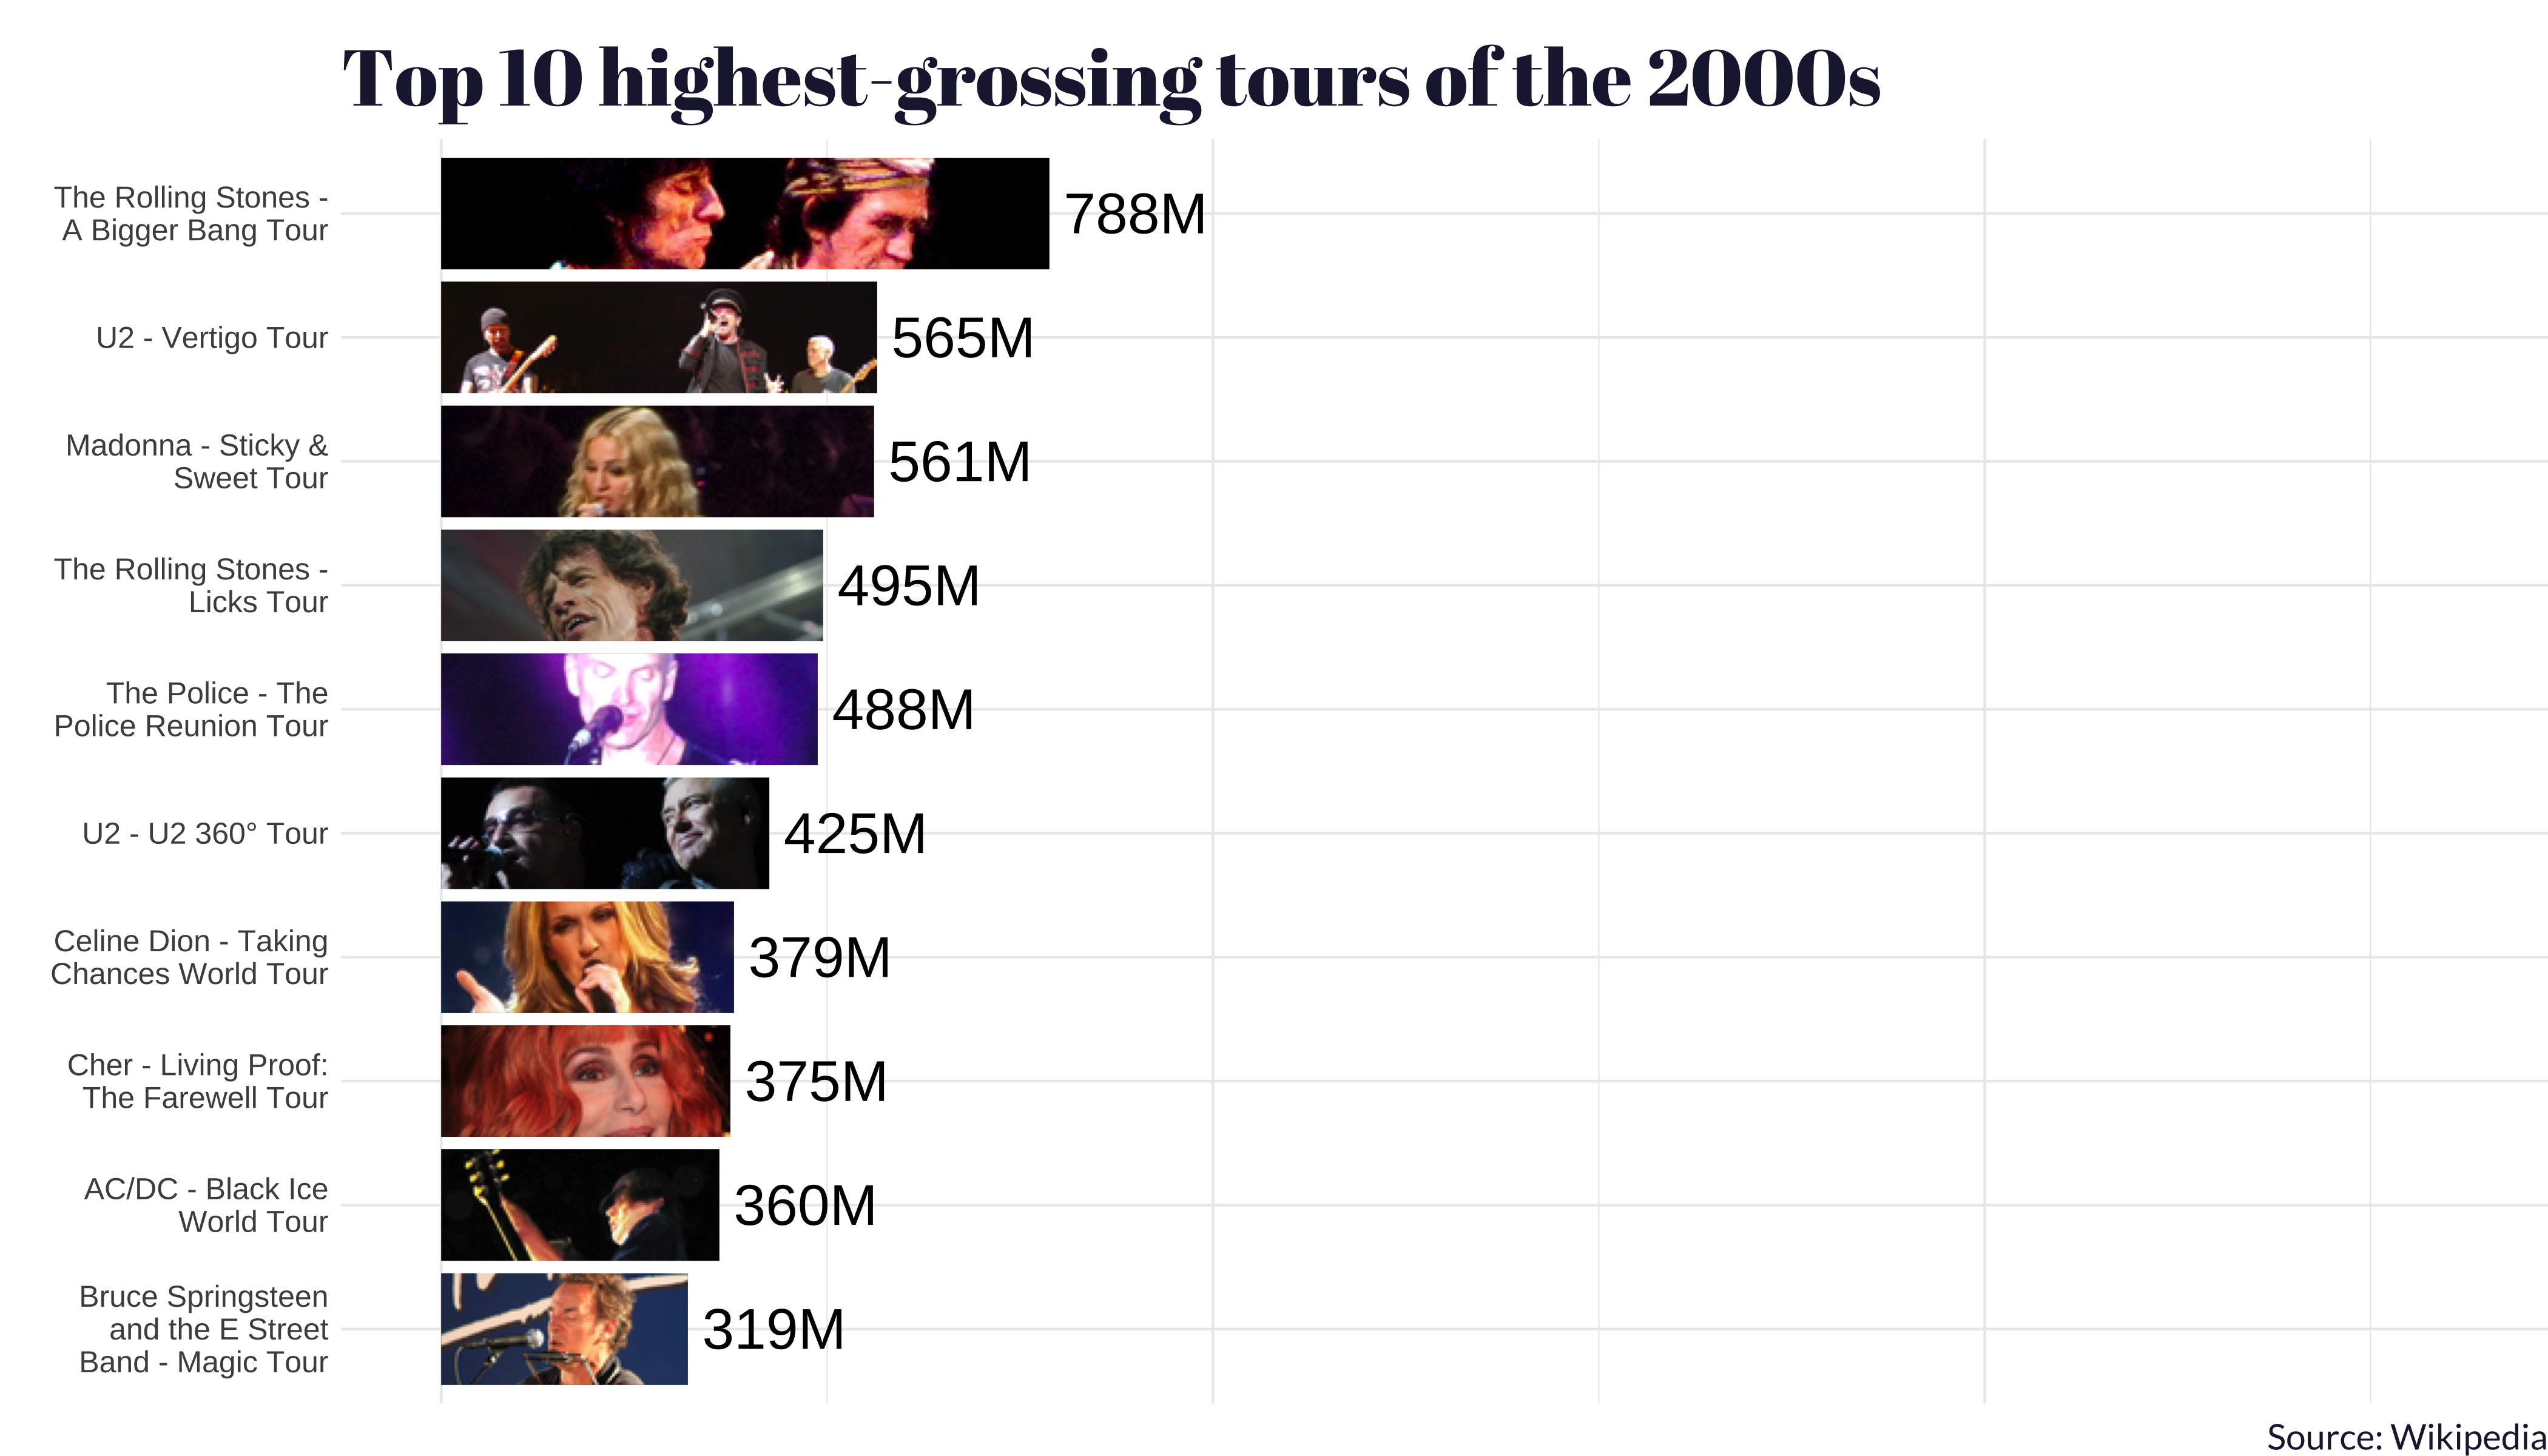 A bar chart titled Top 10 highest-grossing tours of the 2000s with a white background. It lists musical tours from the 2000s with their corresponding revenue figures, each accompanied by a small image of the performing artist or band. From top to bottom, the tours and their revenues are: The Rolling Stones - A Bigger Bang Tour: $788M, U2 - Vertigo Tour: $565M, Madonna - Sticky & Sweet Tour: $561M, The Rolling Stones - Licks Tour: $495M, The Police - The Police Reunion Tour: $488M, U2 - U2 360° Tour: $425M, Celine Dion - Taking Chances World Tour: $379M, Cher - Living Proof: The Farewell Tour: $375M, AC/DC - Black Ice World Tour: $360M, Bruce Springsteen and the E Street Band - Magic Tour: $319M. On the right side of each tour name and revenue, there is a corresponding photograph of the artist or band performing live. The source of the data is credited to Wikipedia at the bottom of the image.